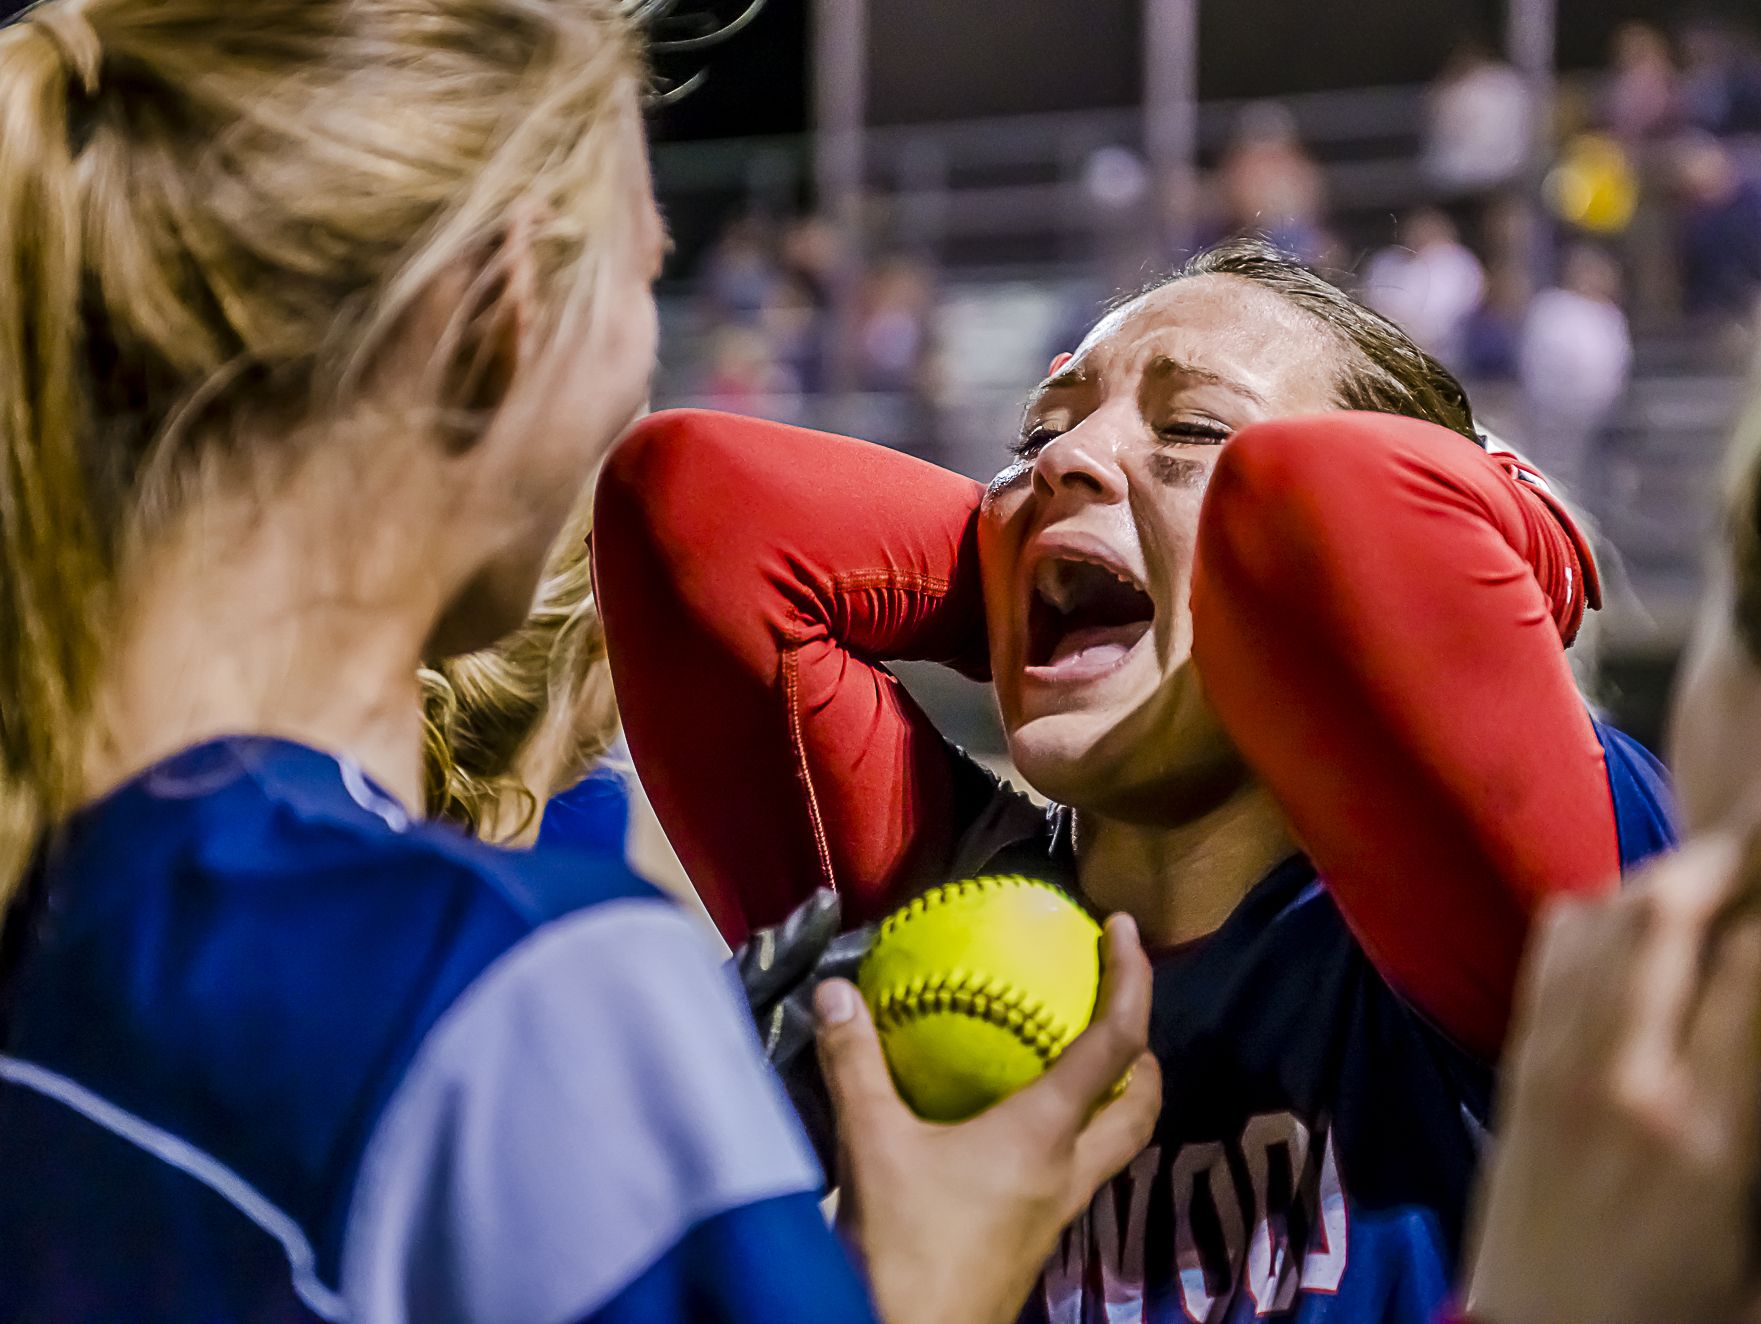 Sierra Stoepker of Lakewood is overcome with emotion as a teammate presents her with the game ball after she hit a walk-off homerun to win their Softball Classic championship Friday.